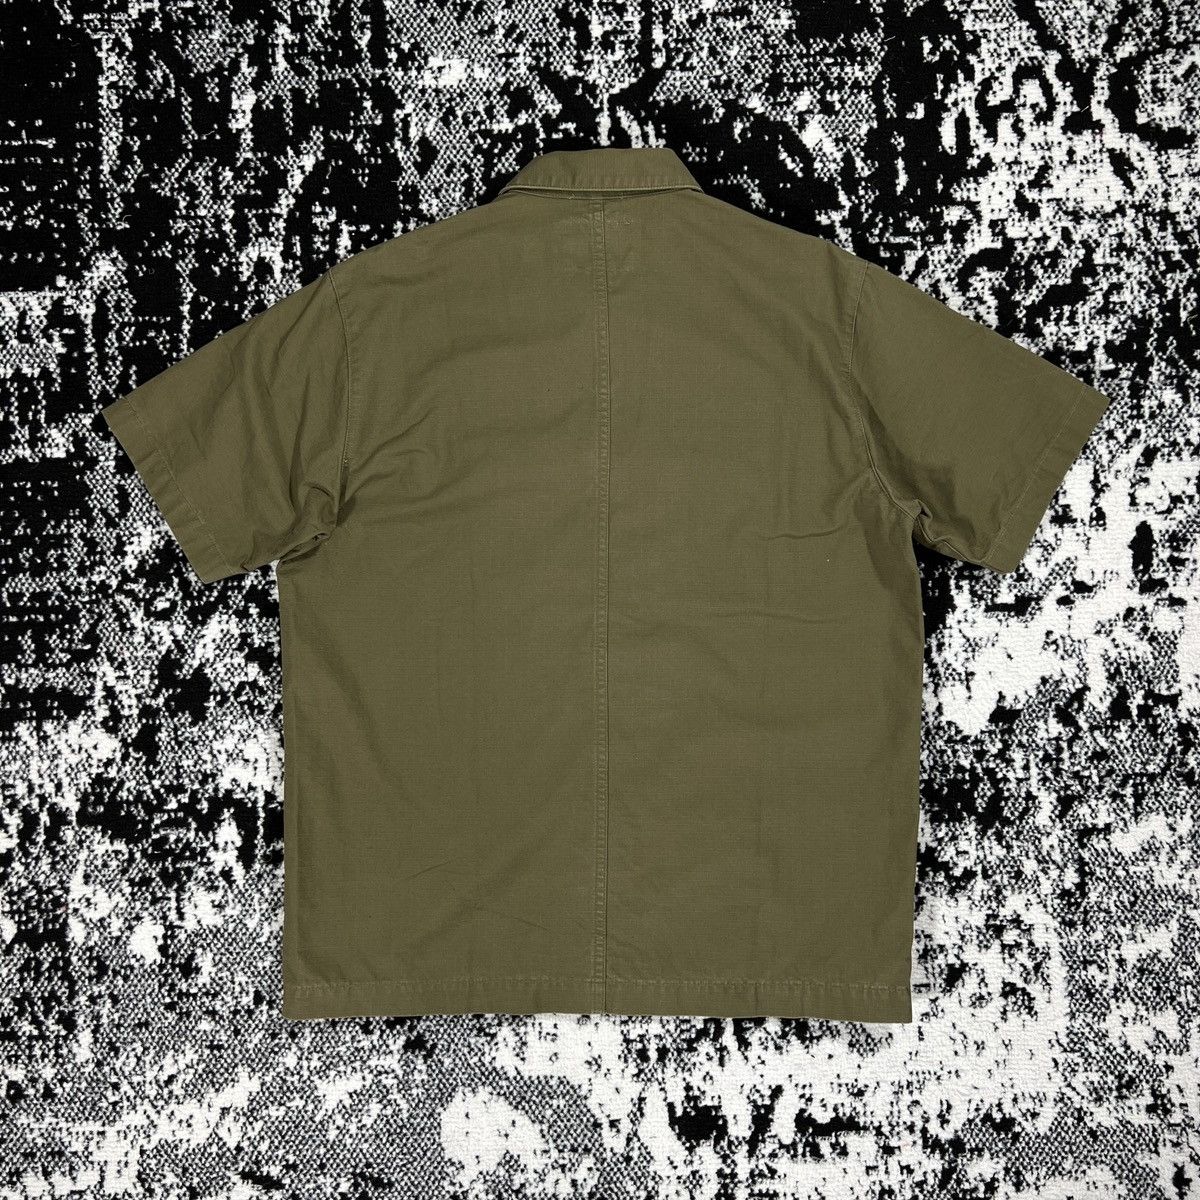 buy US online WTAPS BUDS SS SHIRT COTTON RIPSTOP 2019 | www.fcbsudan.com